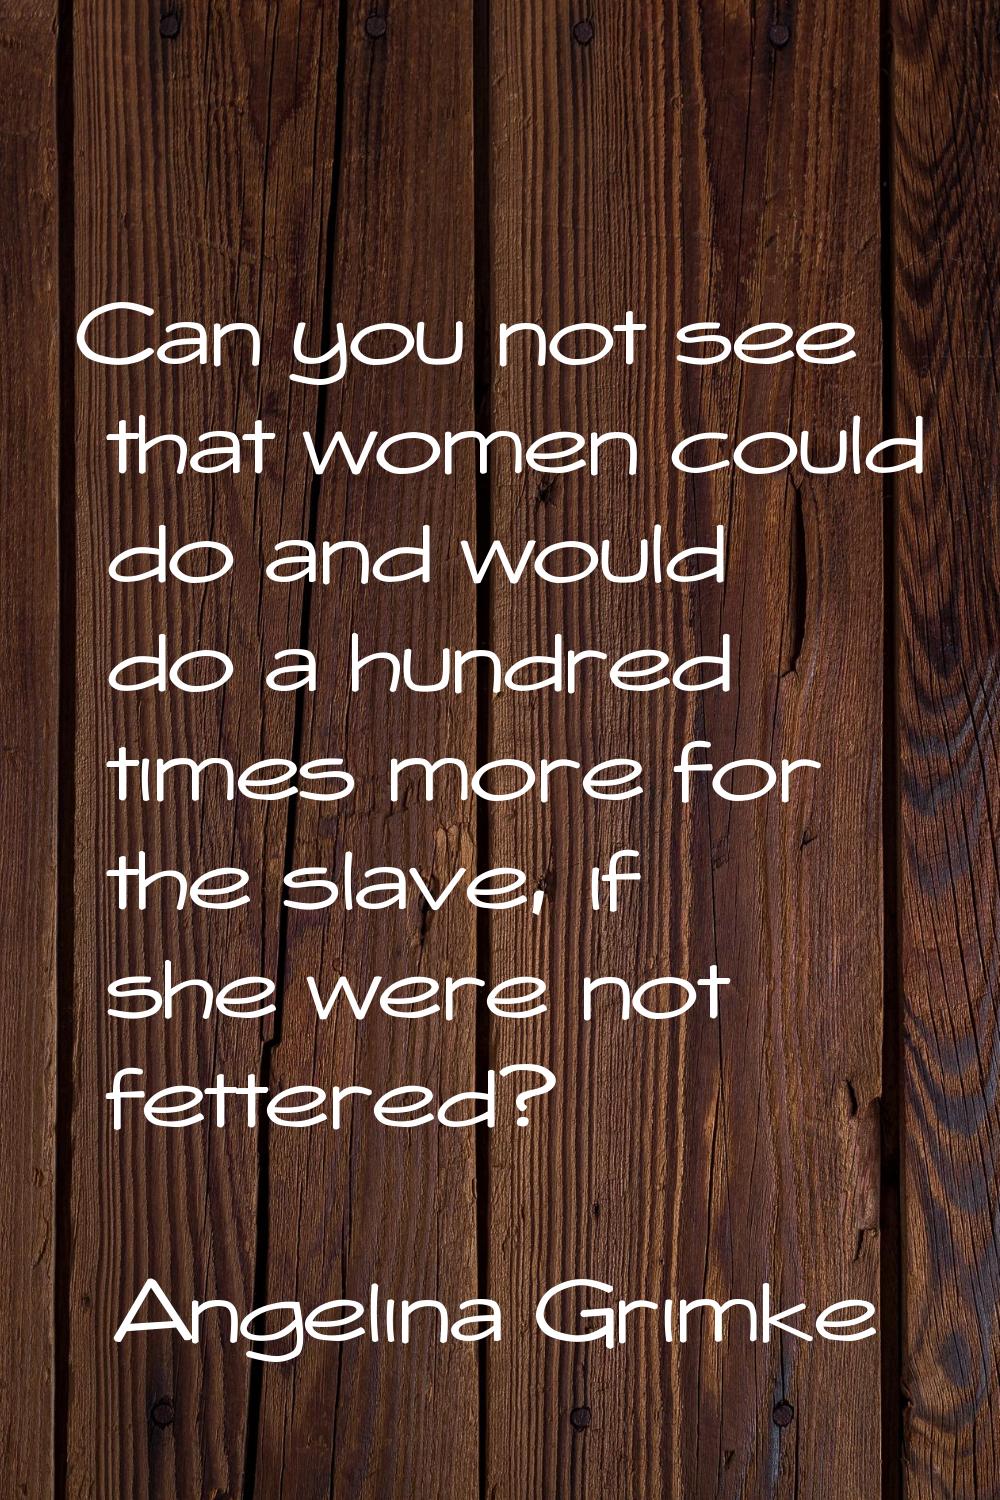 Can you not see that women could do and would do a hundred times more for the slave, if she were no